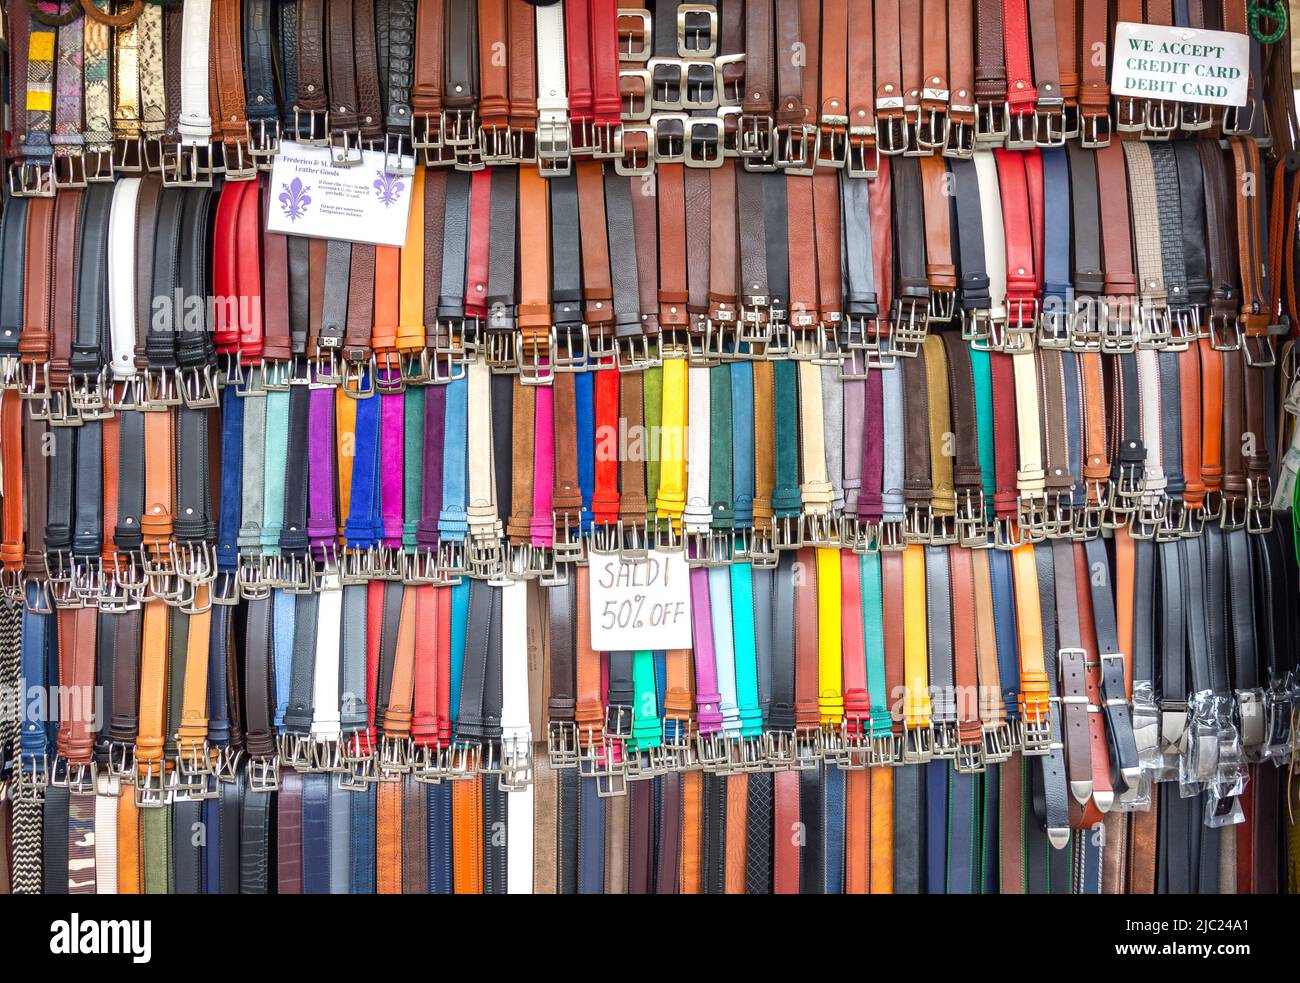 Rack of leather belts for sale, New Market (Mercato Nuovo)  Florence (Firenze), Tuscany Region, Italy Stock Photo